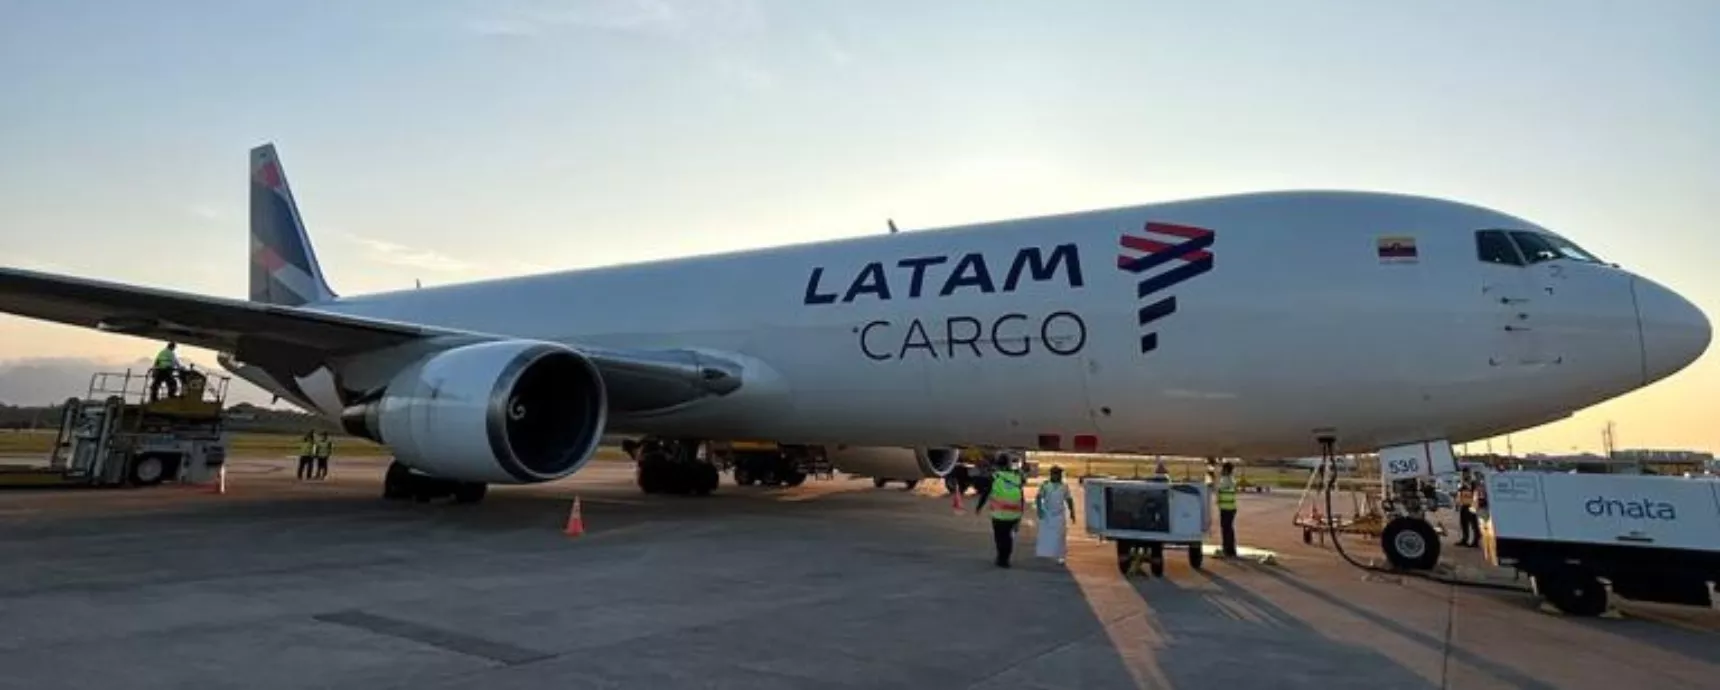 Floripa Airport Cargo gains fourth weekly frequency